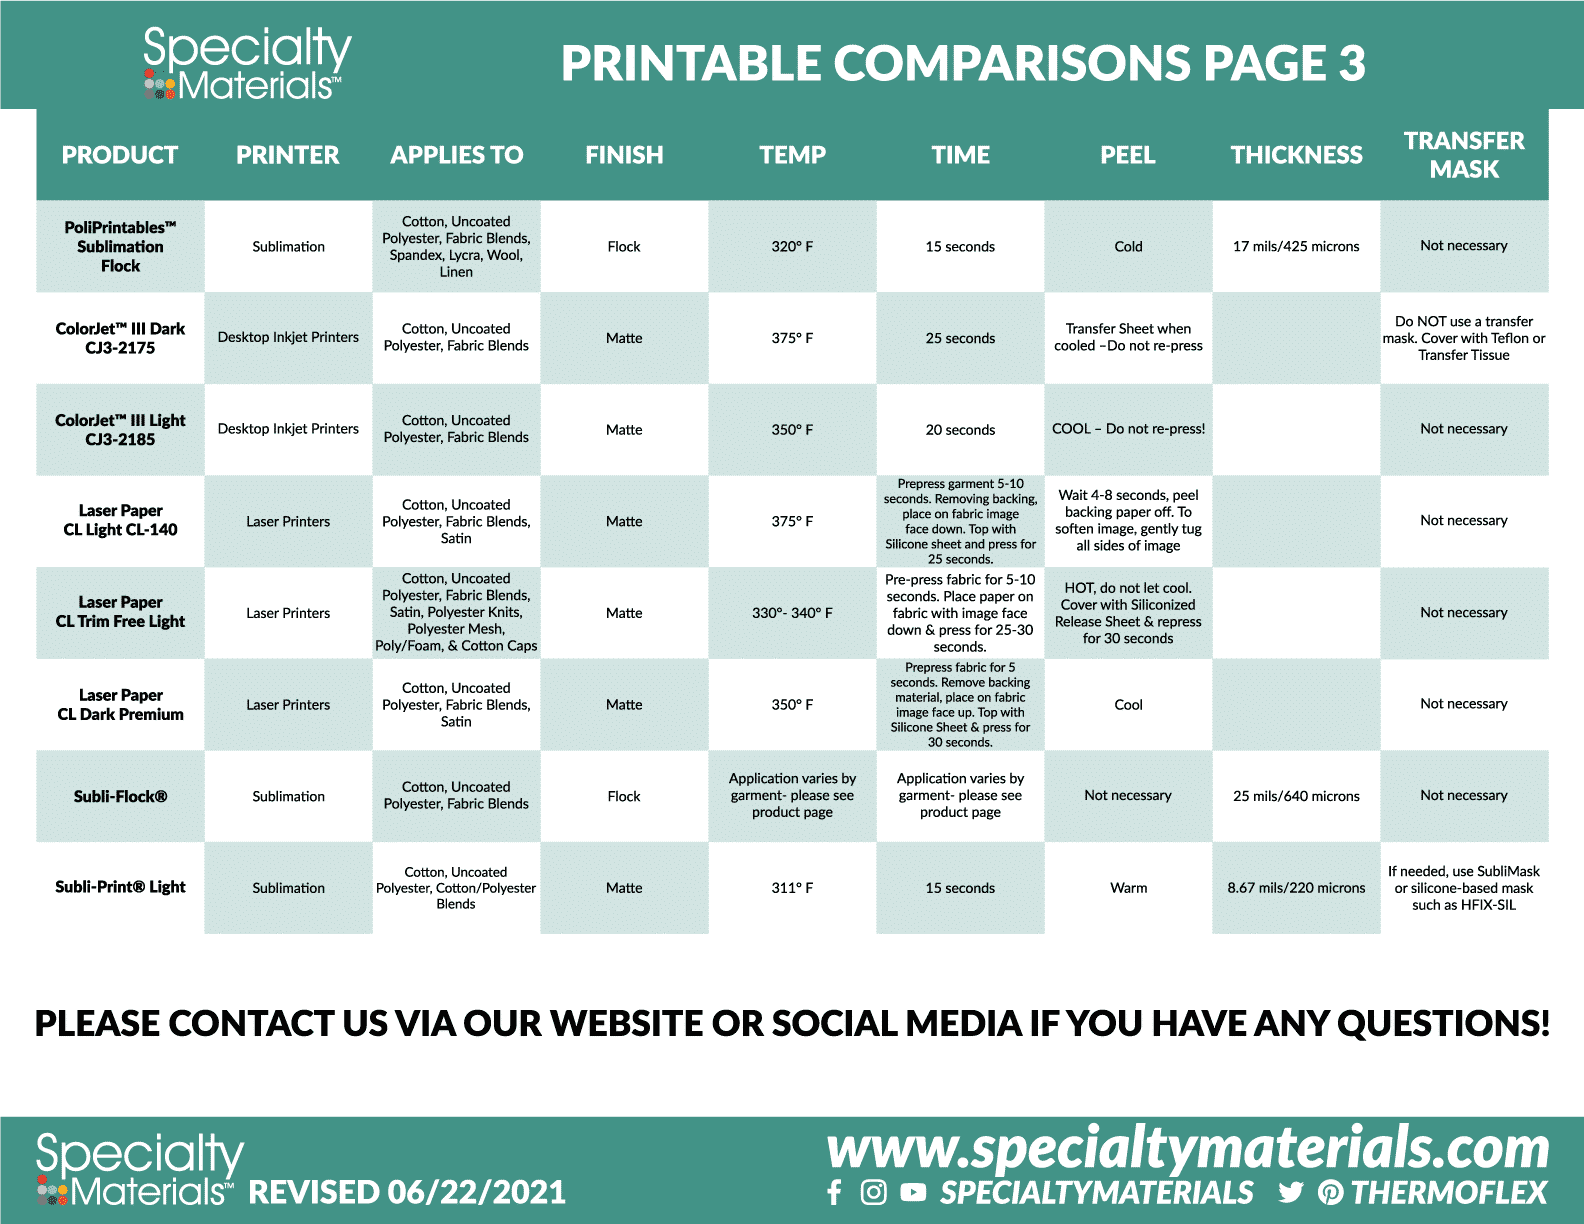 A printable image of the above printable comparison information, the third page